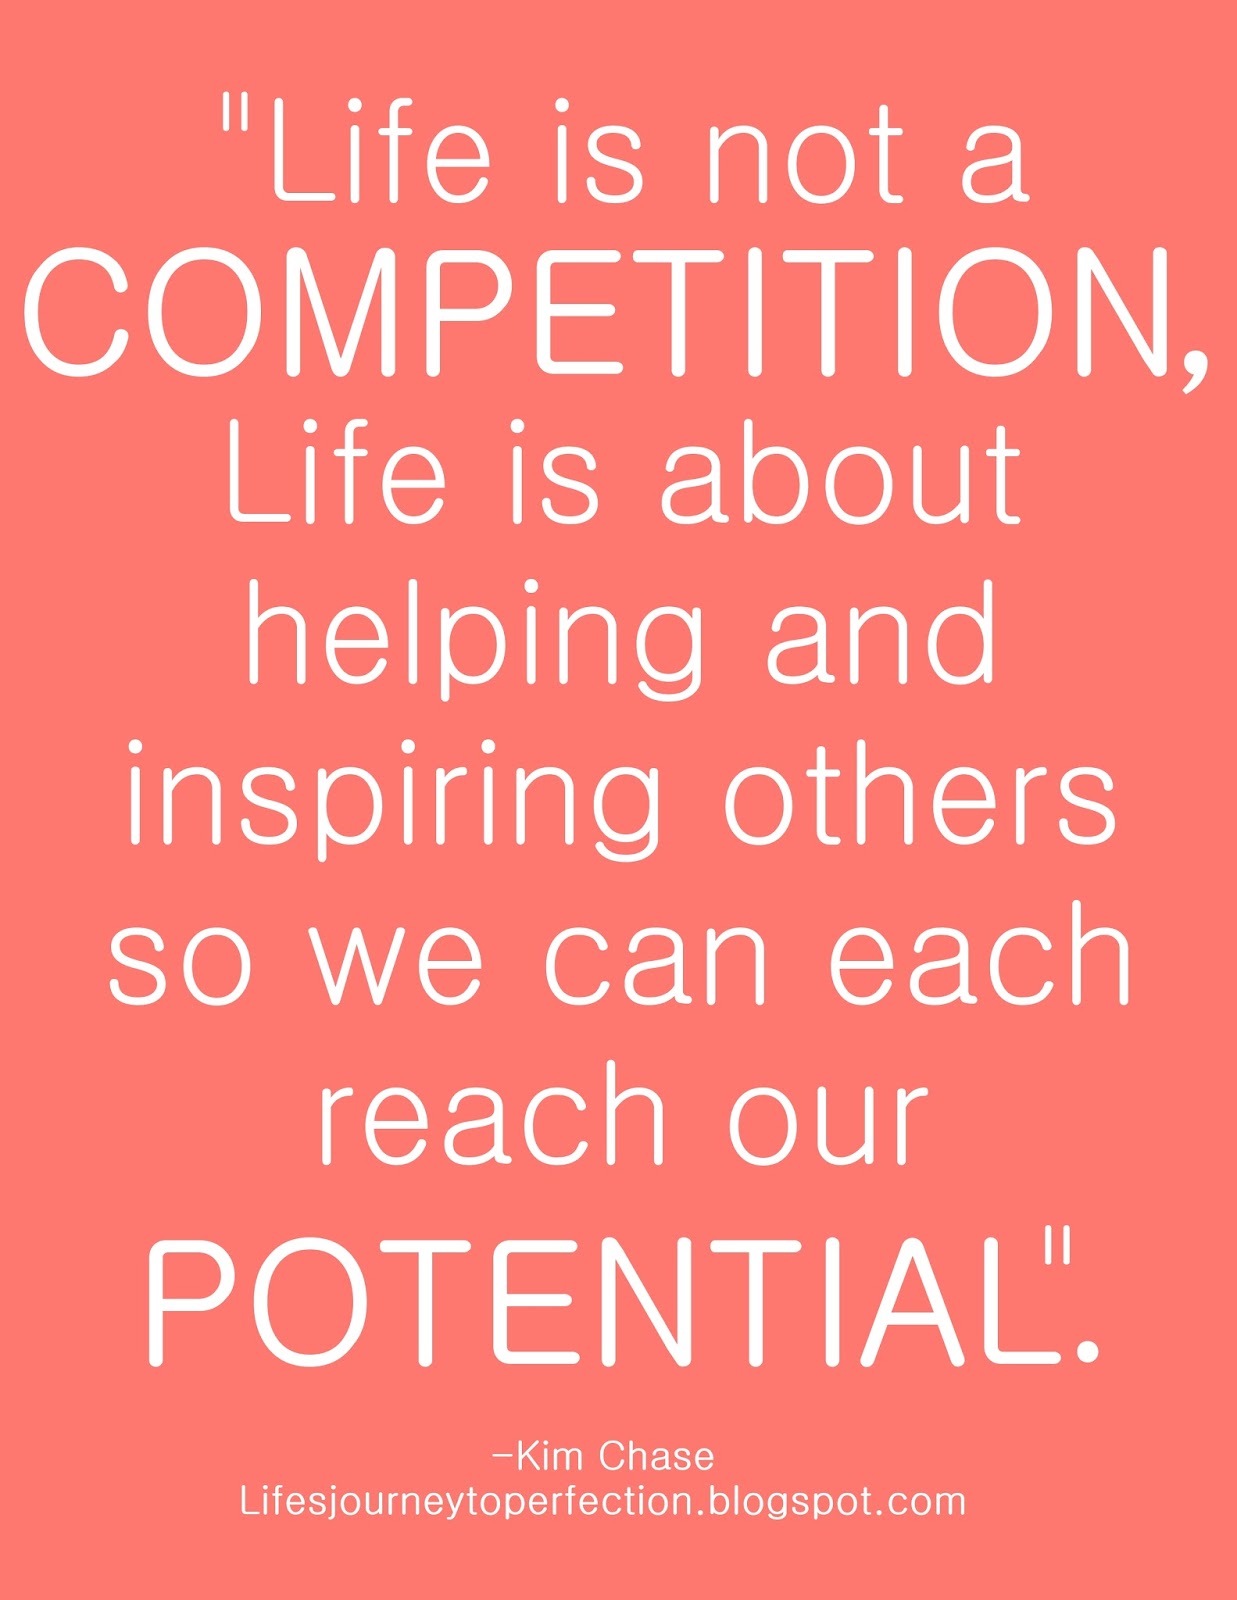 Life is not a competition. Life is about helping and inspiring others so we can each reach our potential. Kim Chase